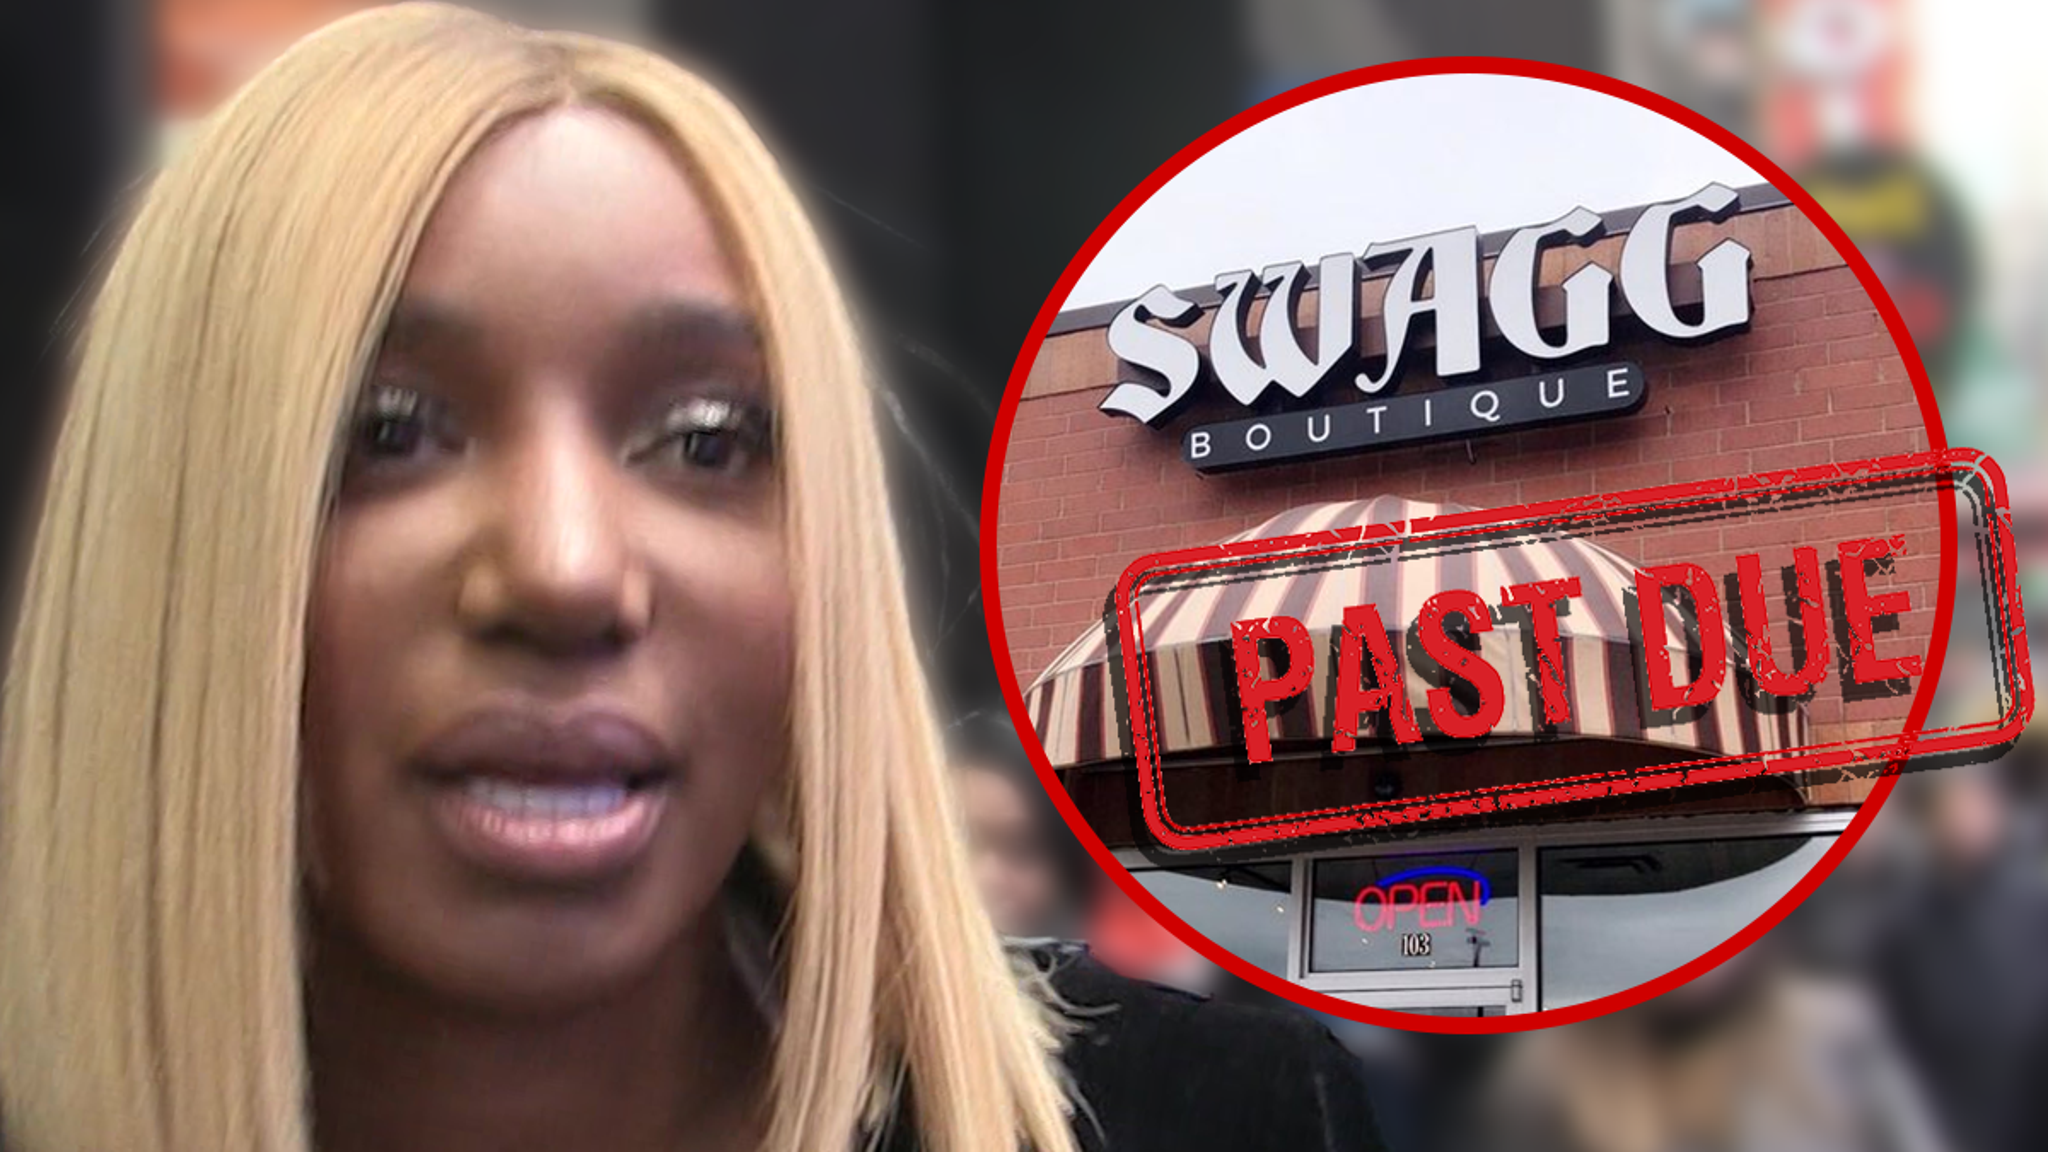 NeNe Leakes Sued by Landlord, Allegedly Failed To Pay Rent At Swagg Boutique Store